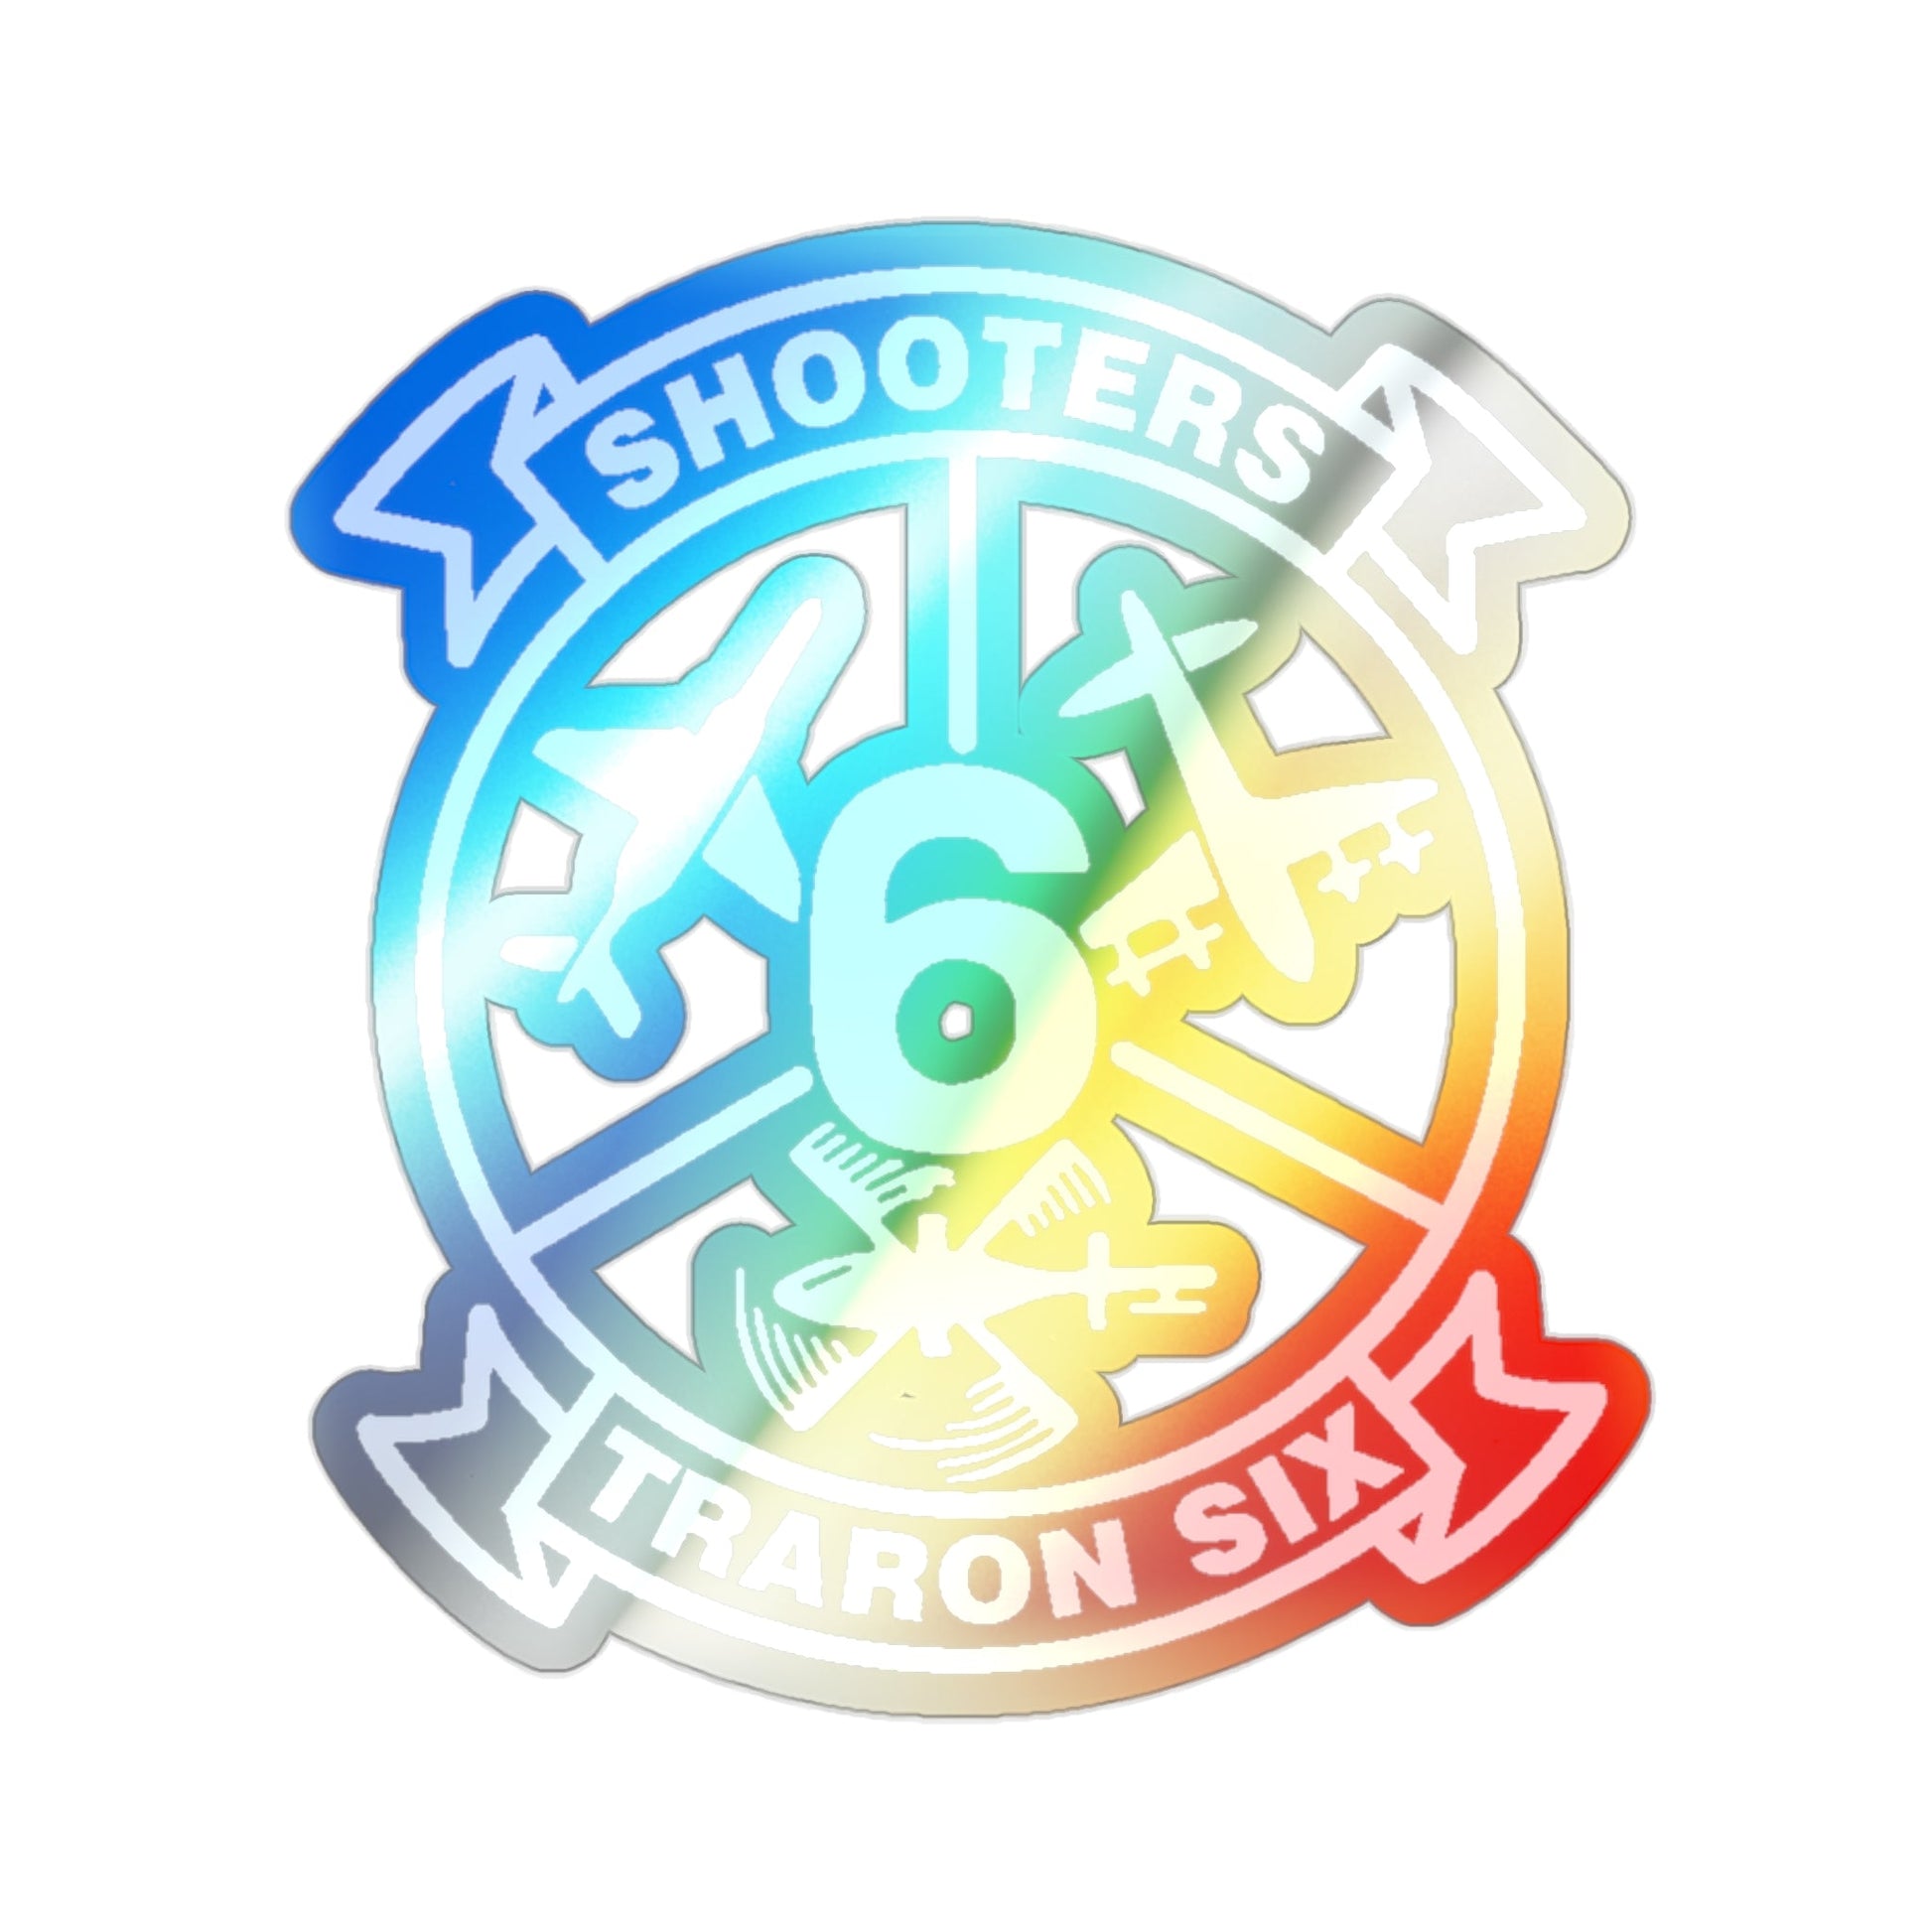 VT 6 TRARON VT6 Shooters (U.S. Navy) Holographic STICKER Die-Cut Vinyl Decal-2 Inch-The Sticker Space